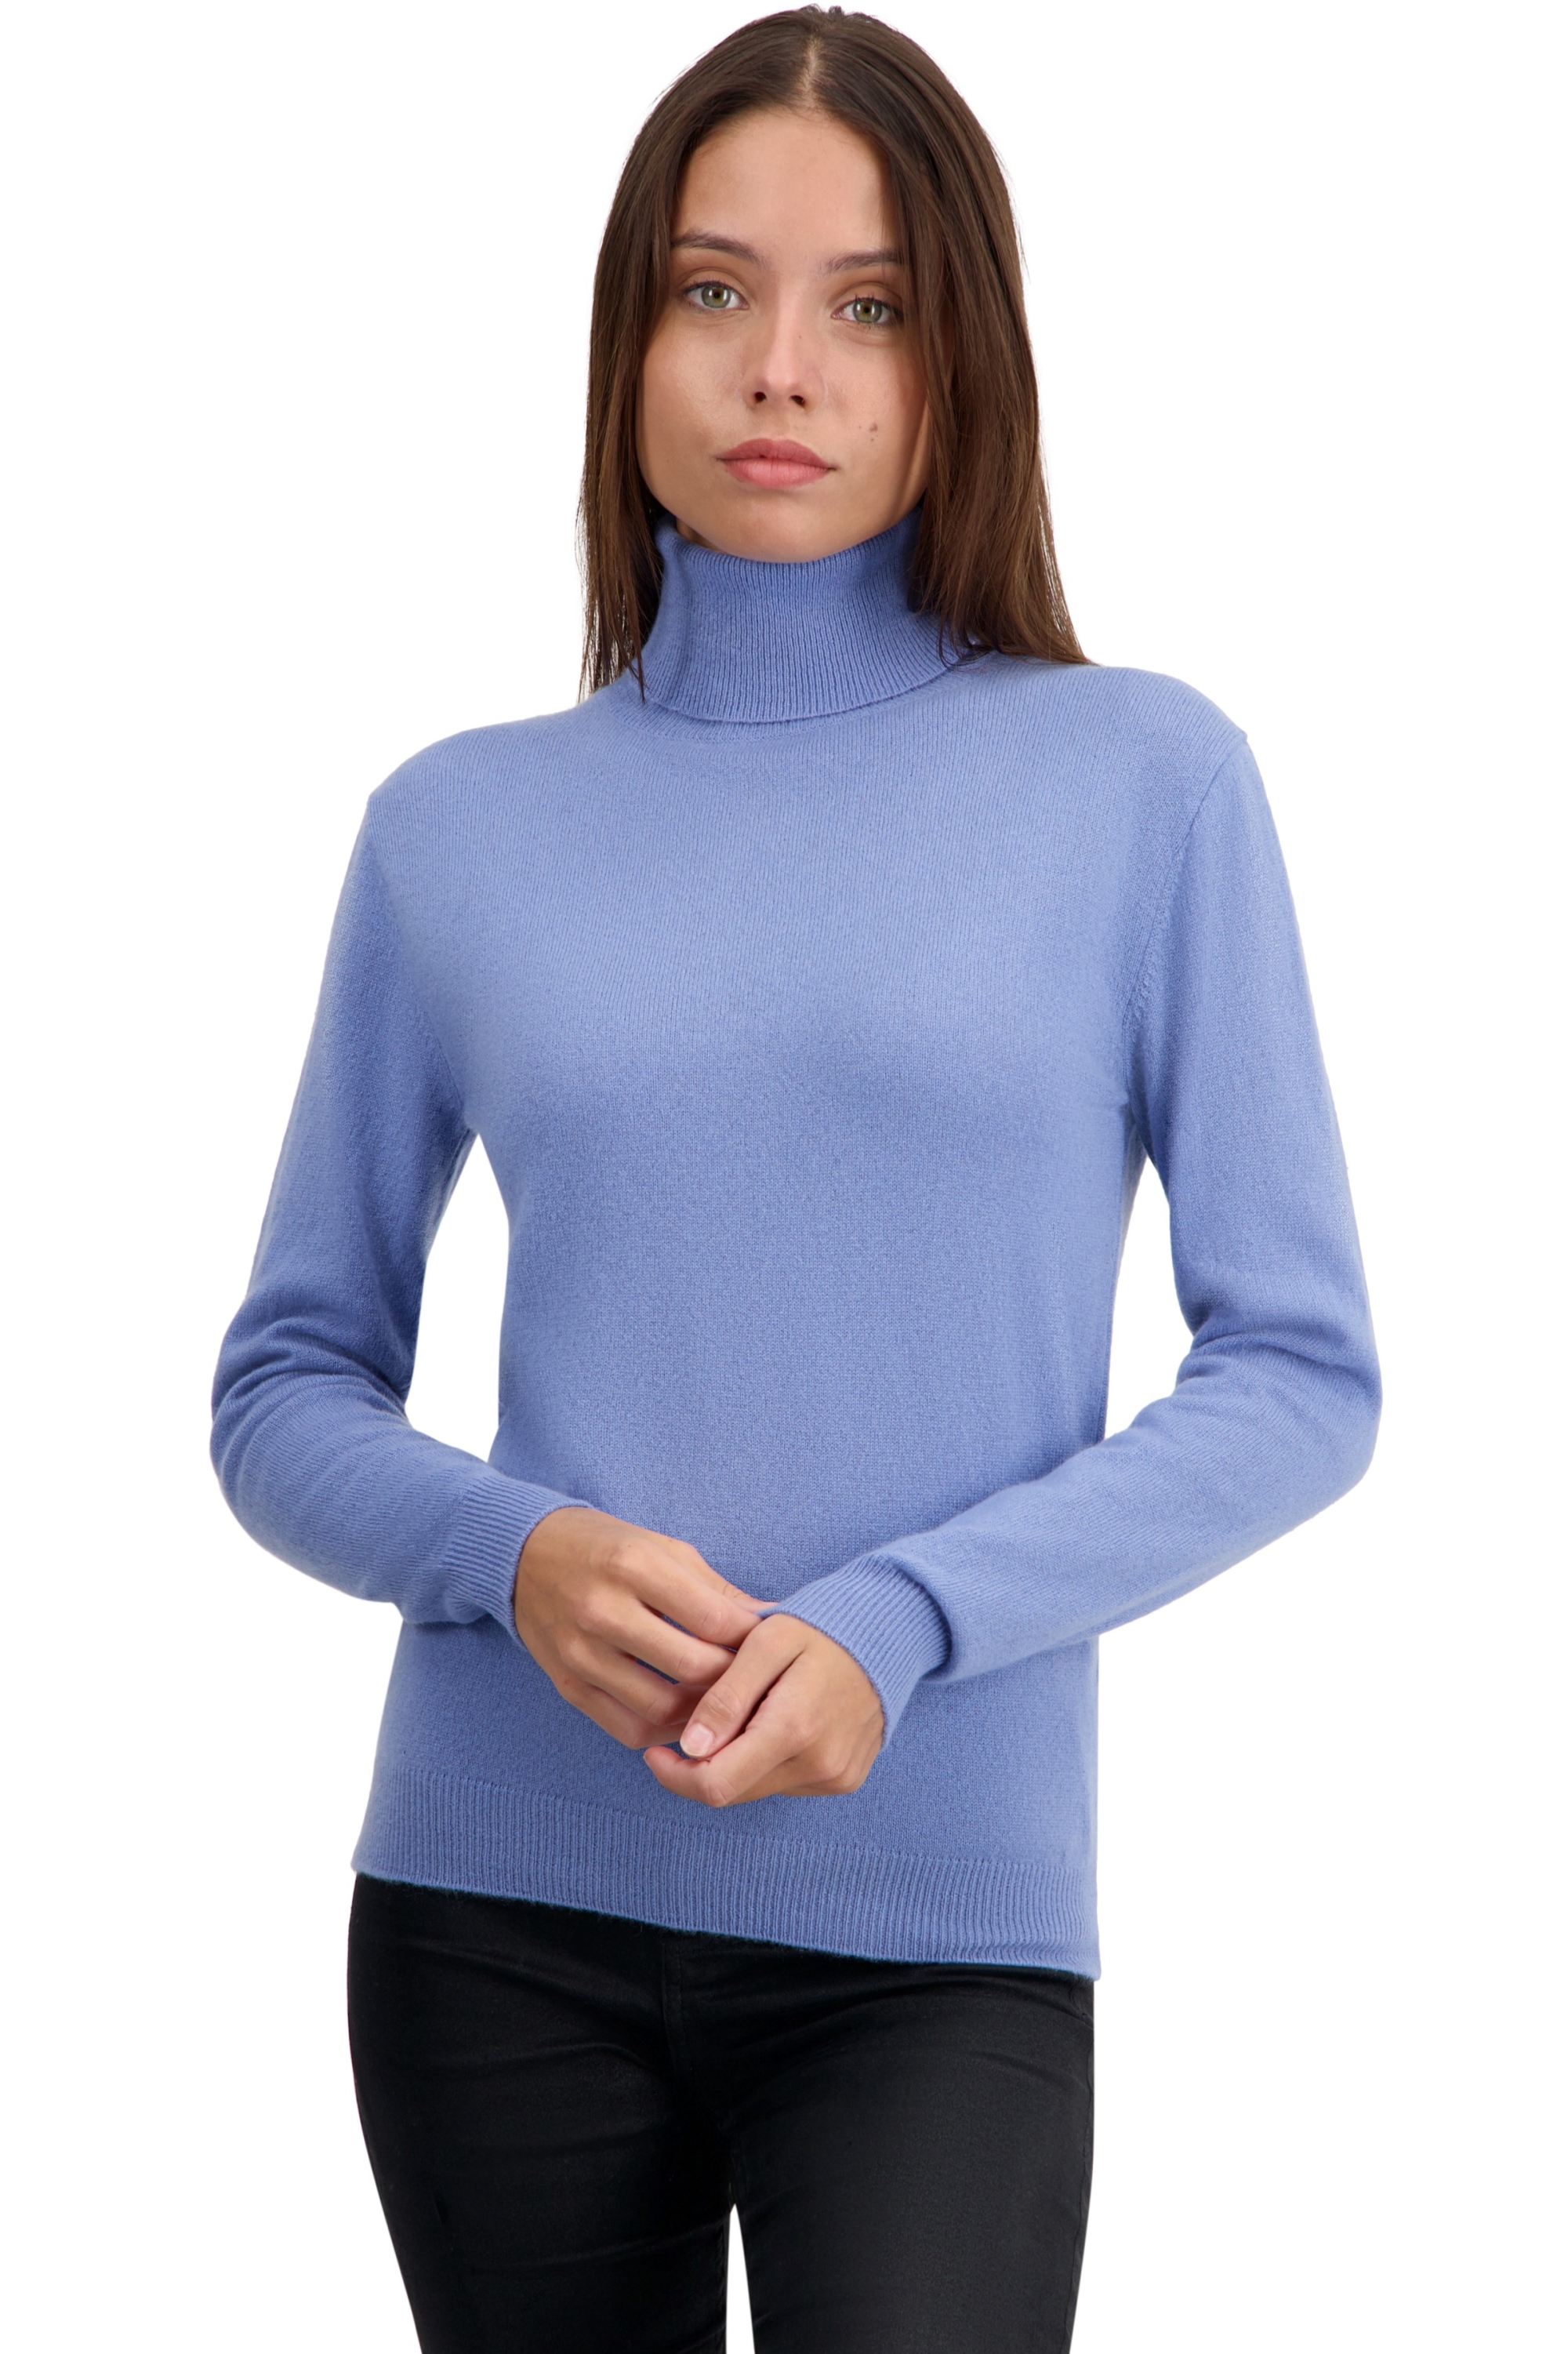 Cashmere ladies roll neck tale first light blue 2xl